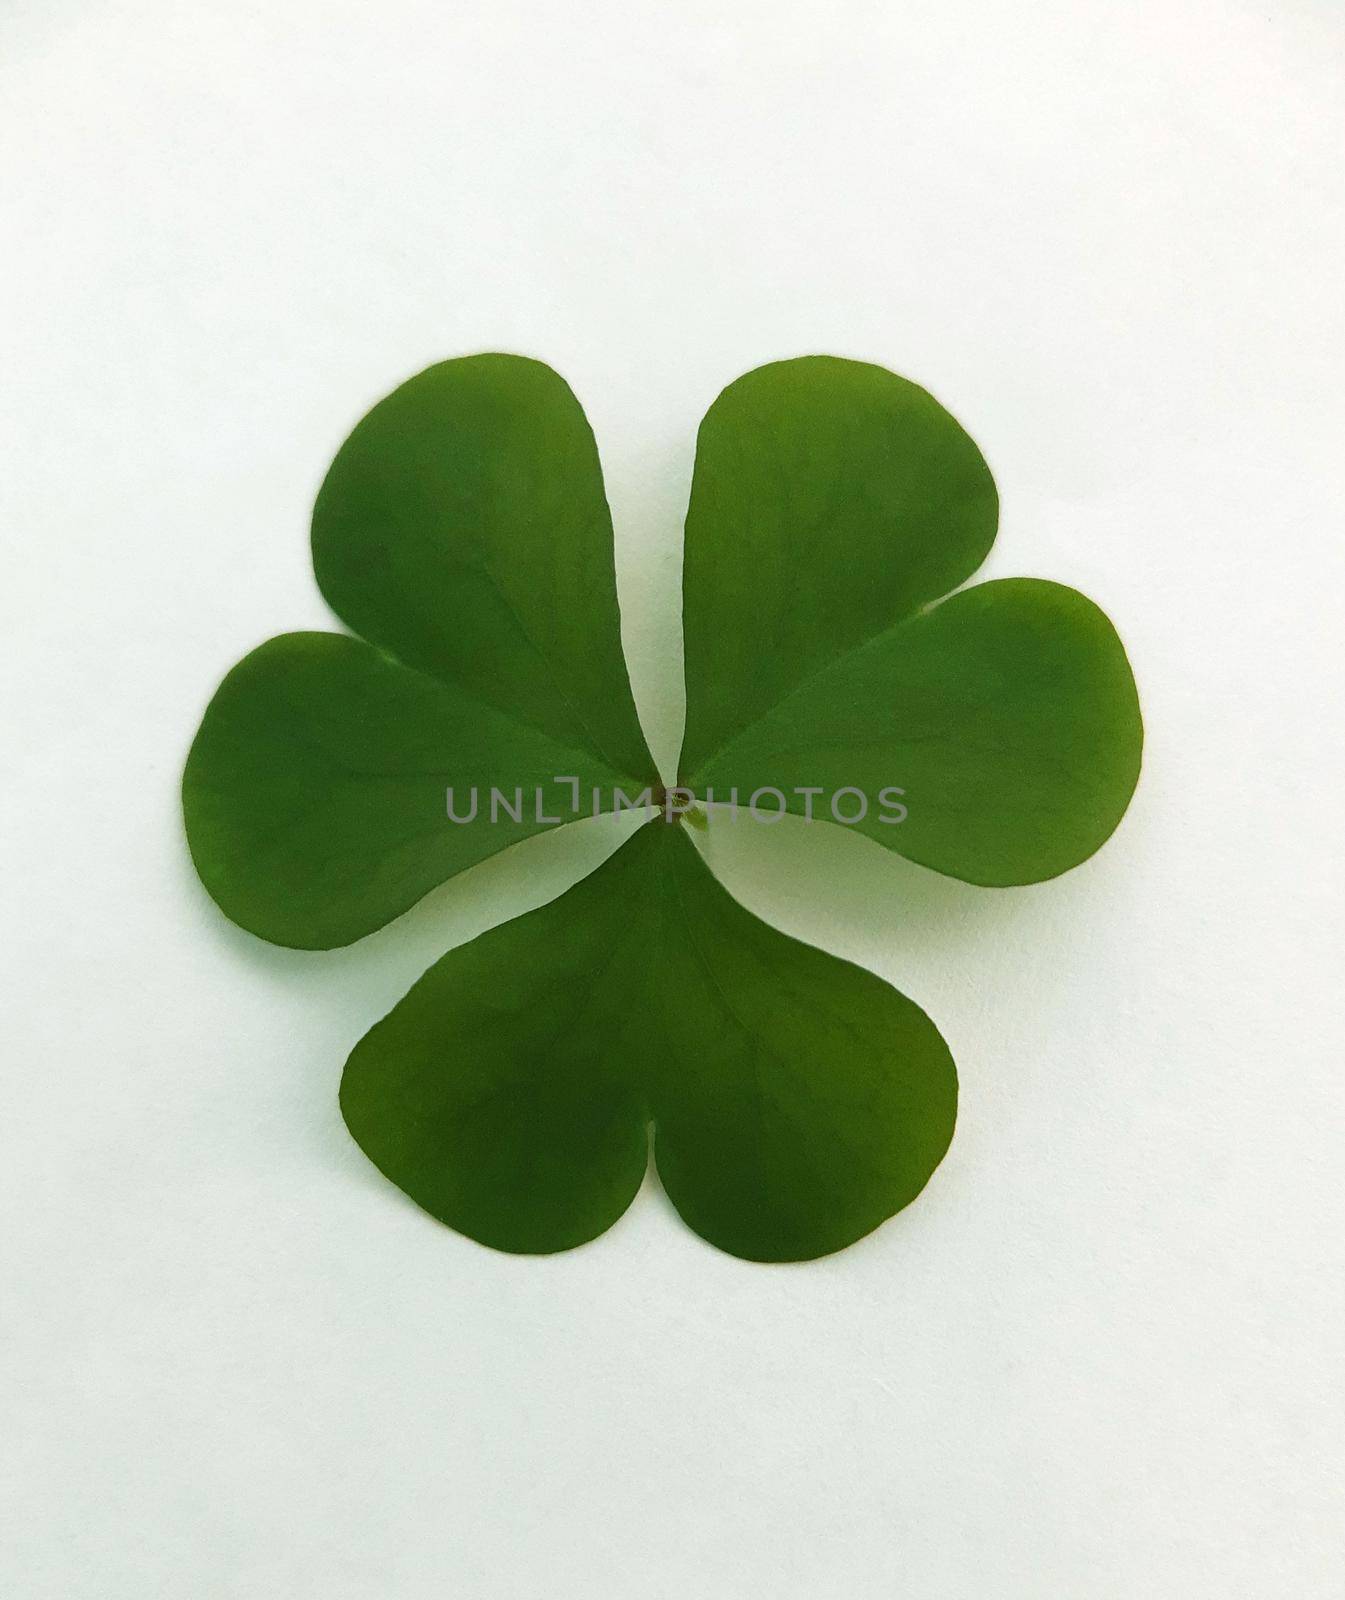 Green clover leaf on a white background close-up.